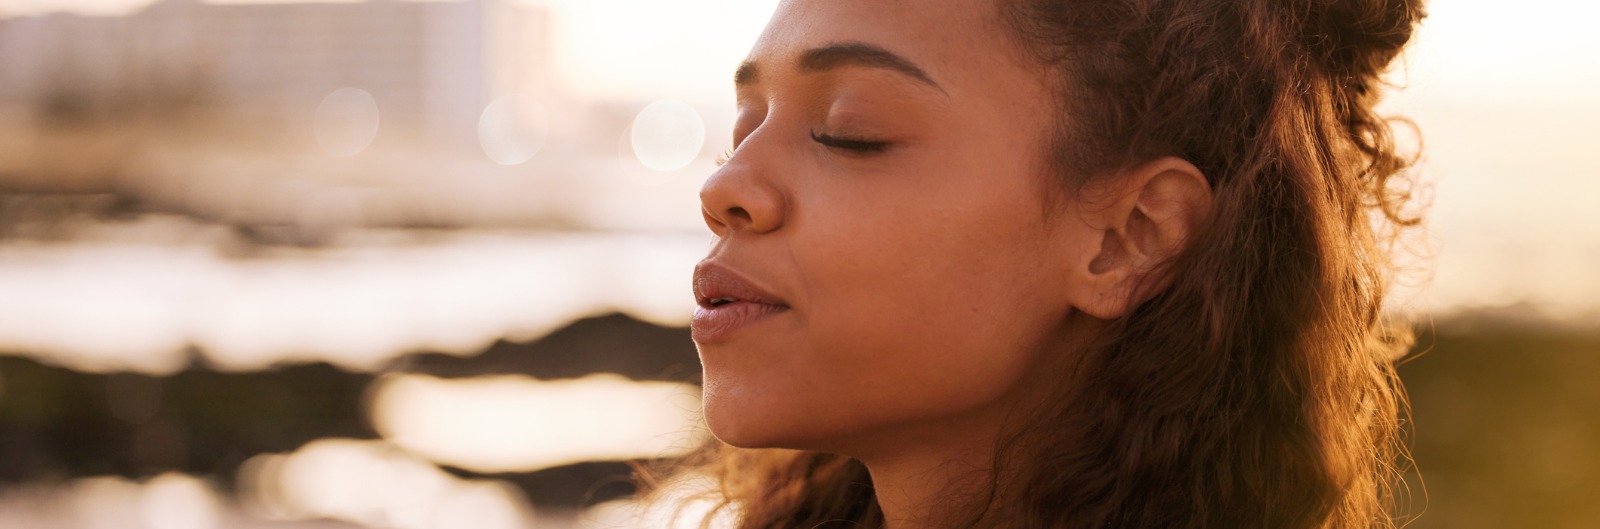 woman in a meditative pose with her eyes closed outside 